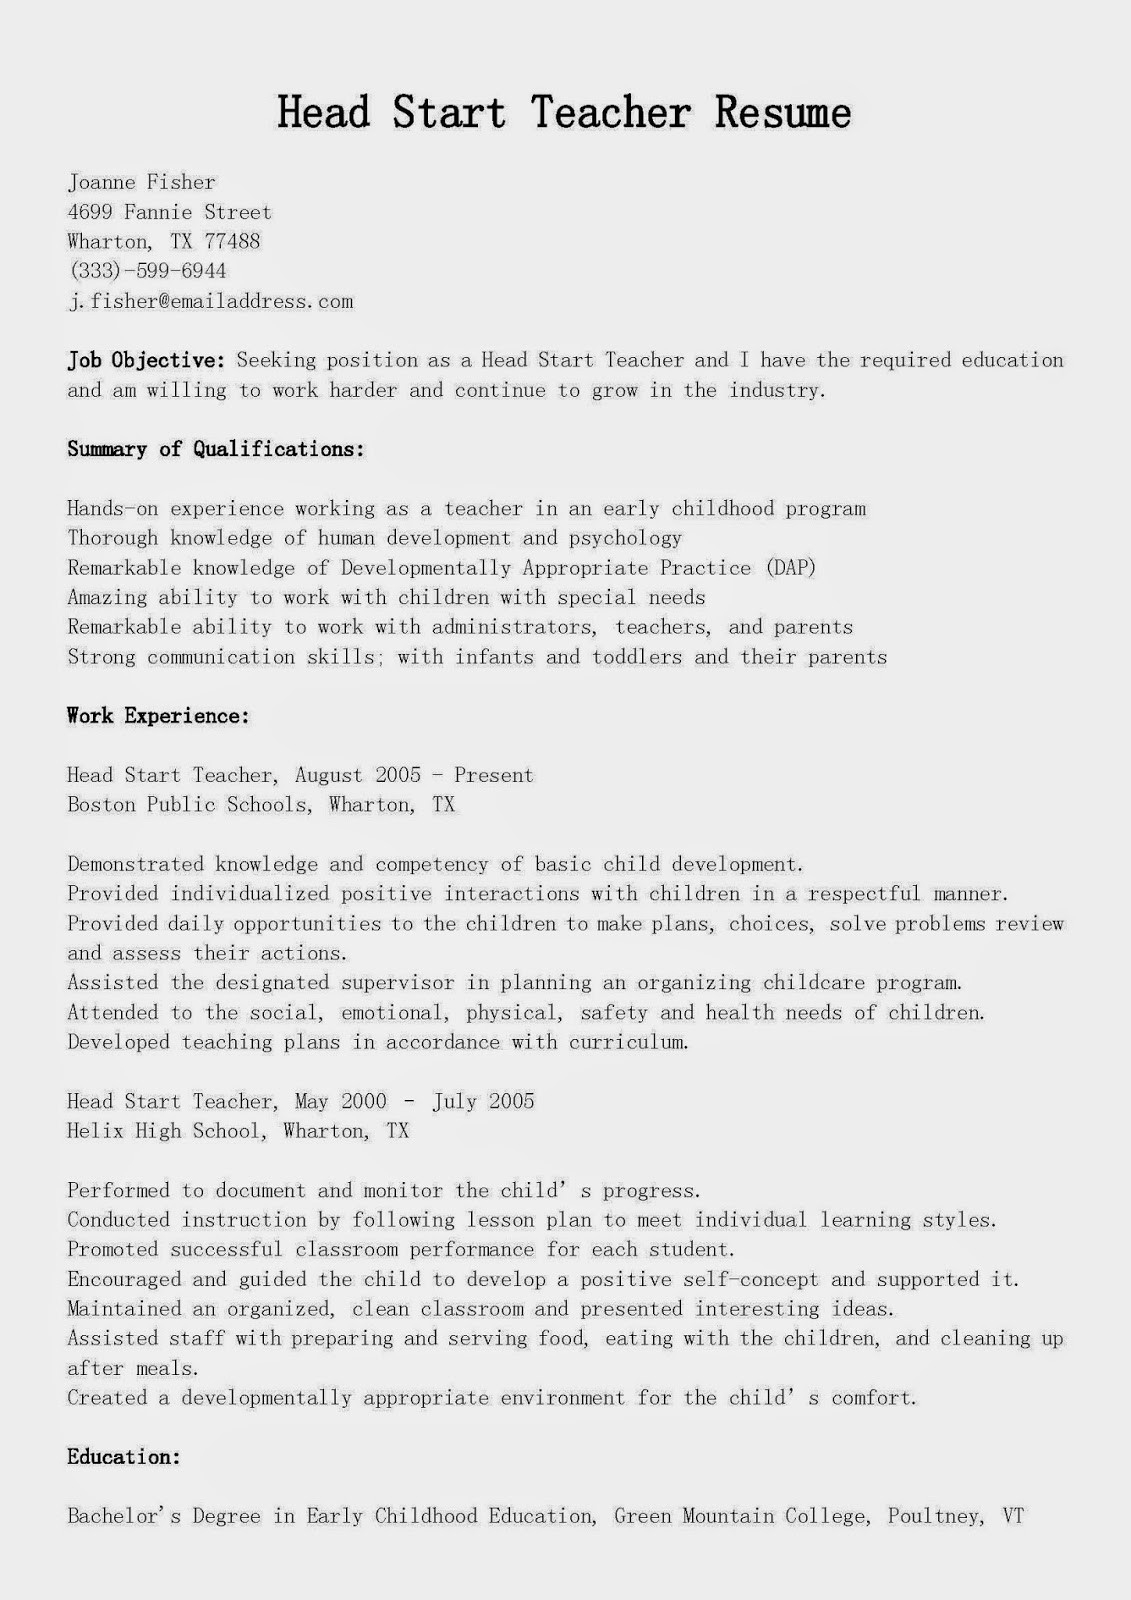 Cover Letter for Teaching Job Template - Cover Letter Example for Resume Beautiful Higher Education Cover